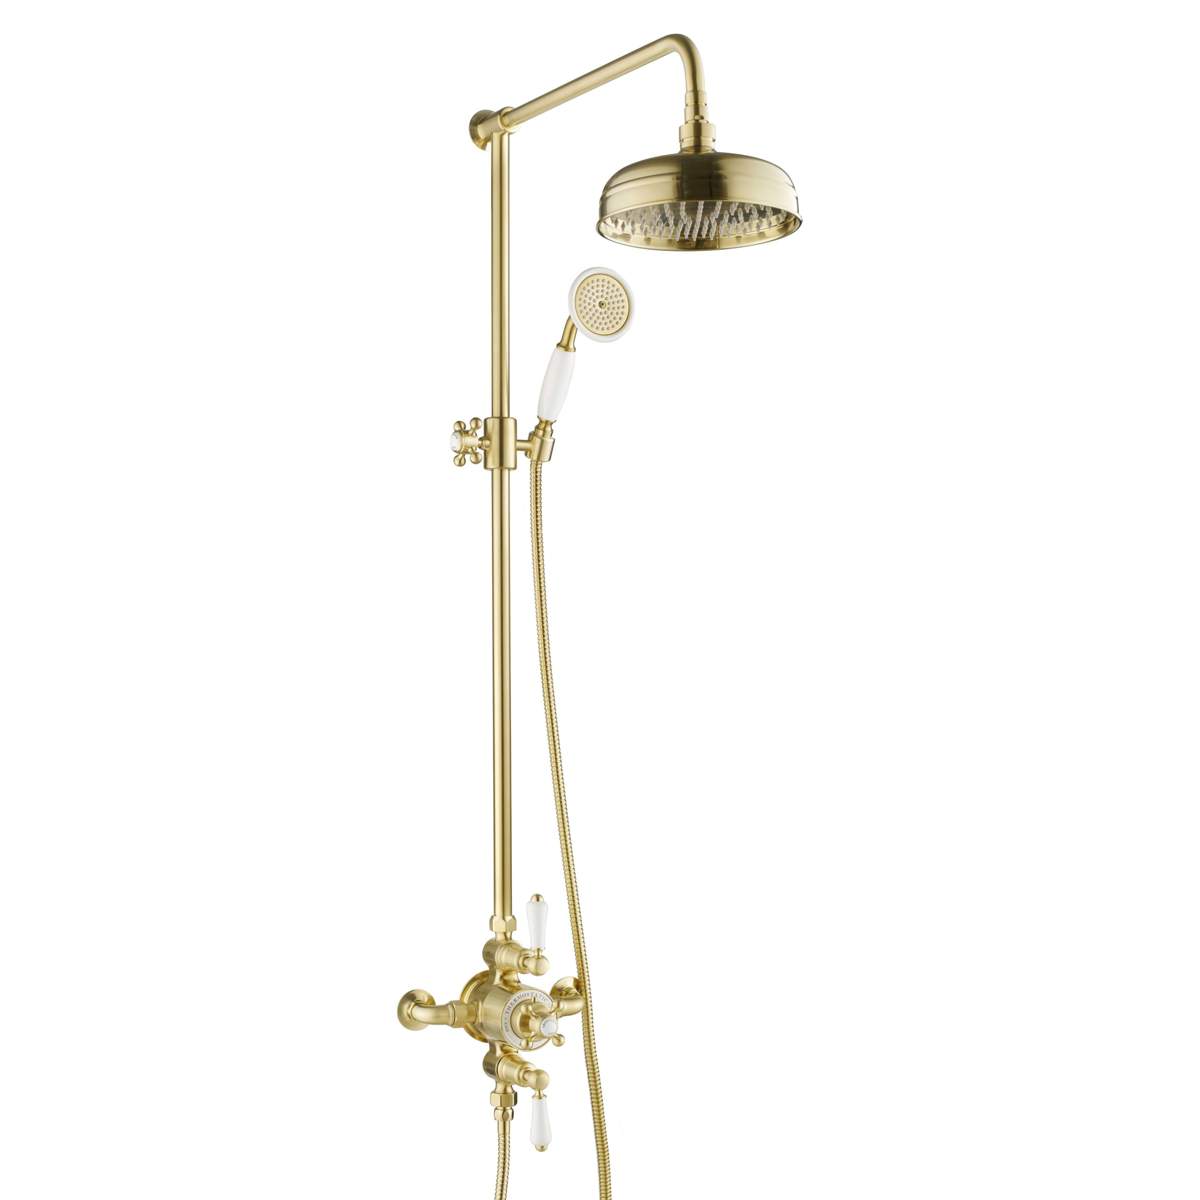 JTP Grosvenor Cross Brushed Brass Exposed Thermostatic Valve with Riser and Kit (GRO819BBR)